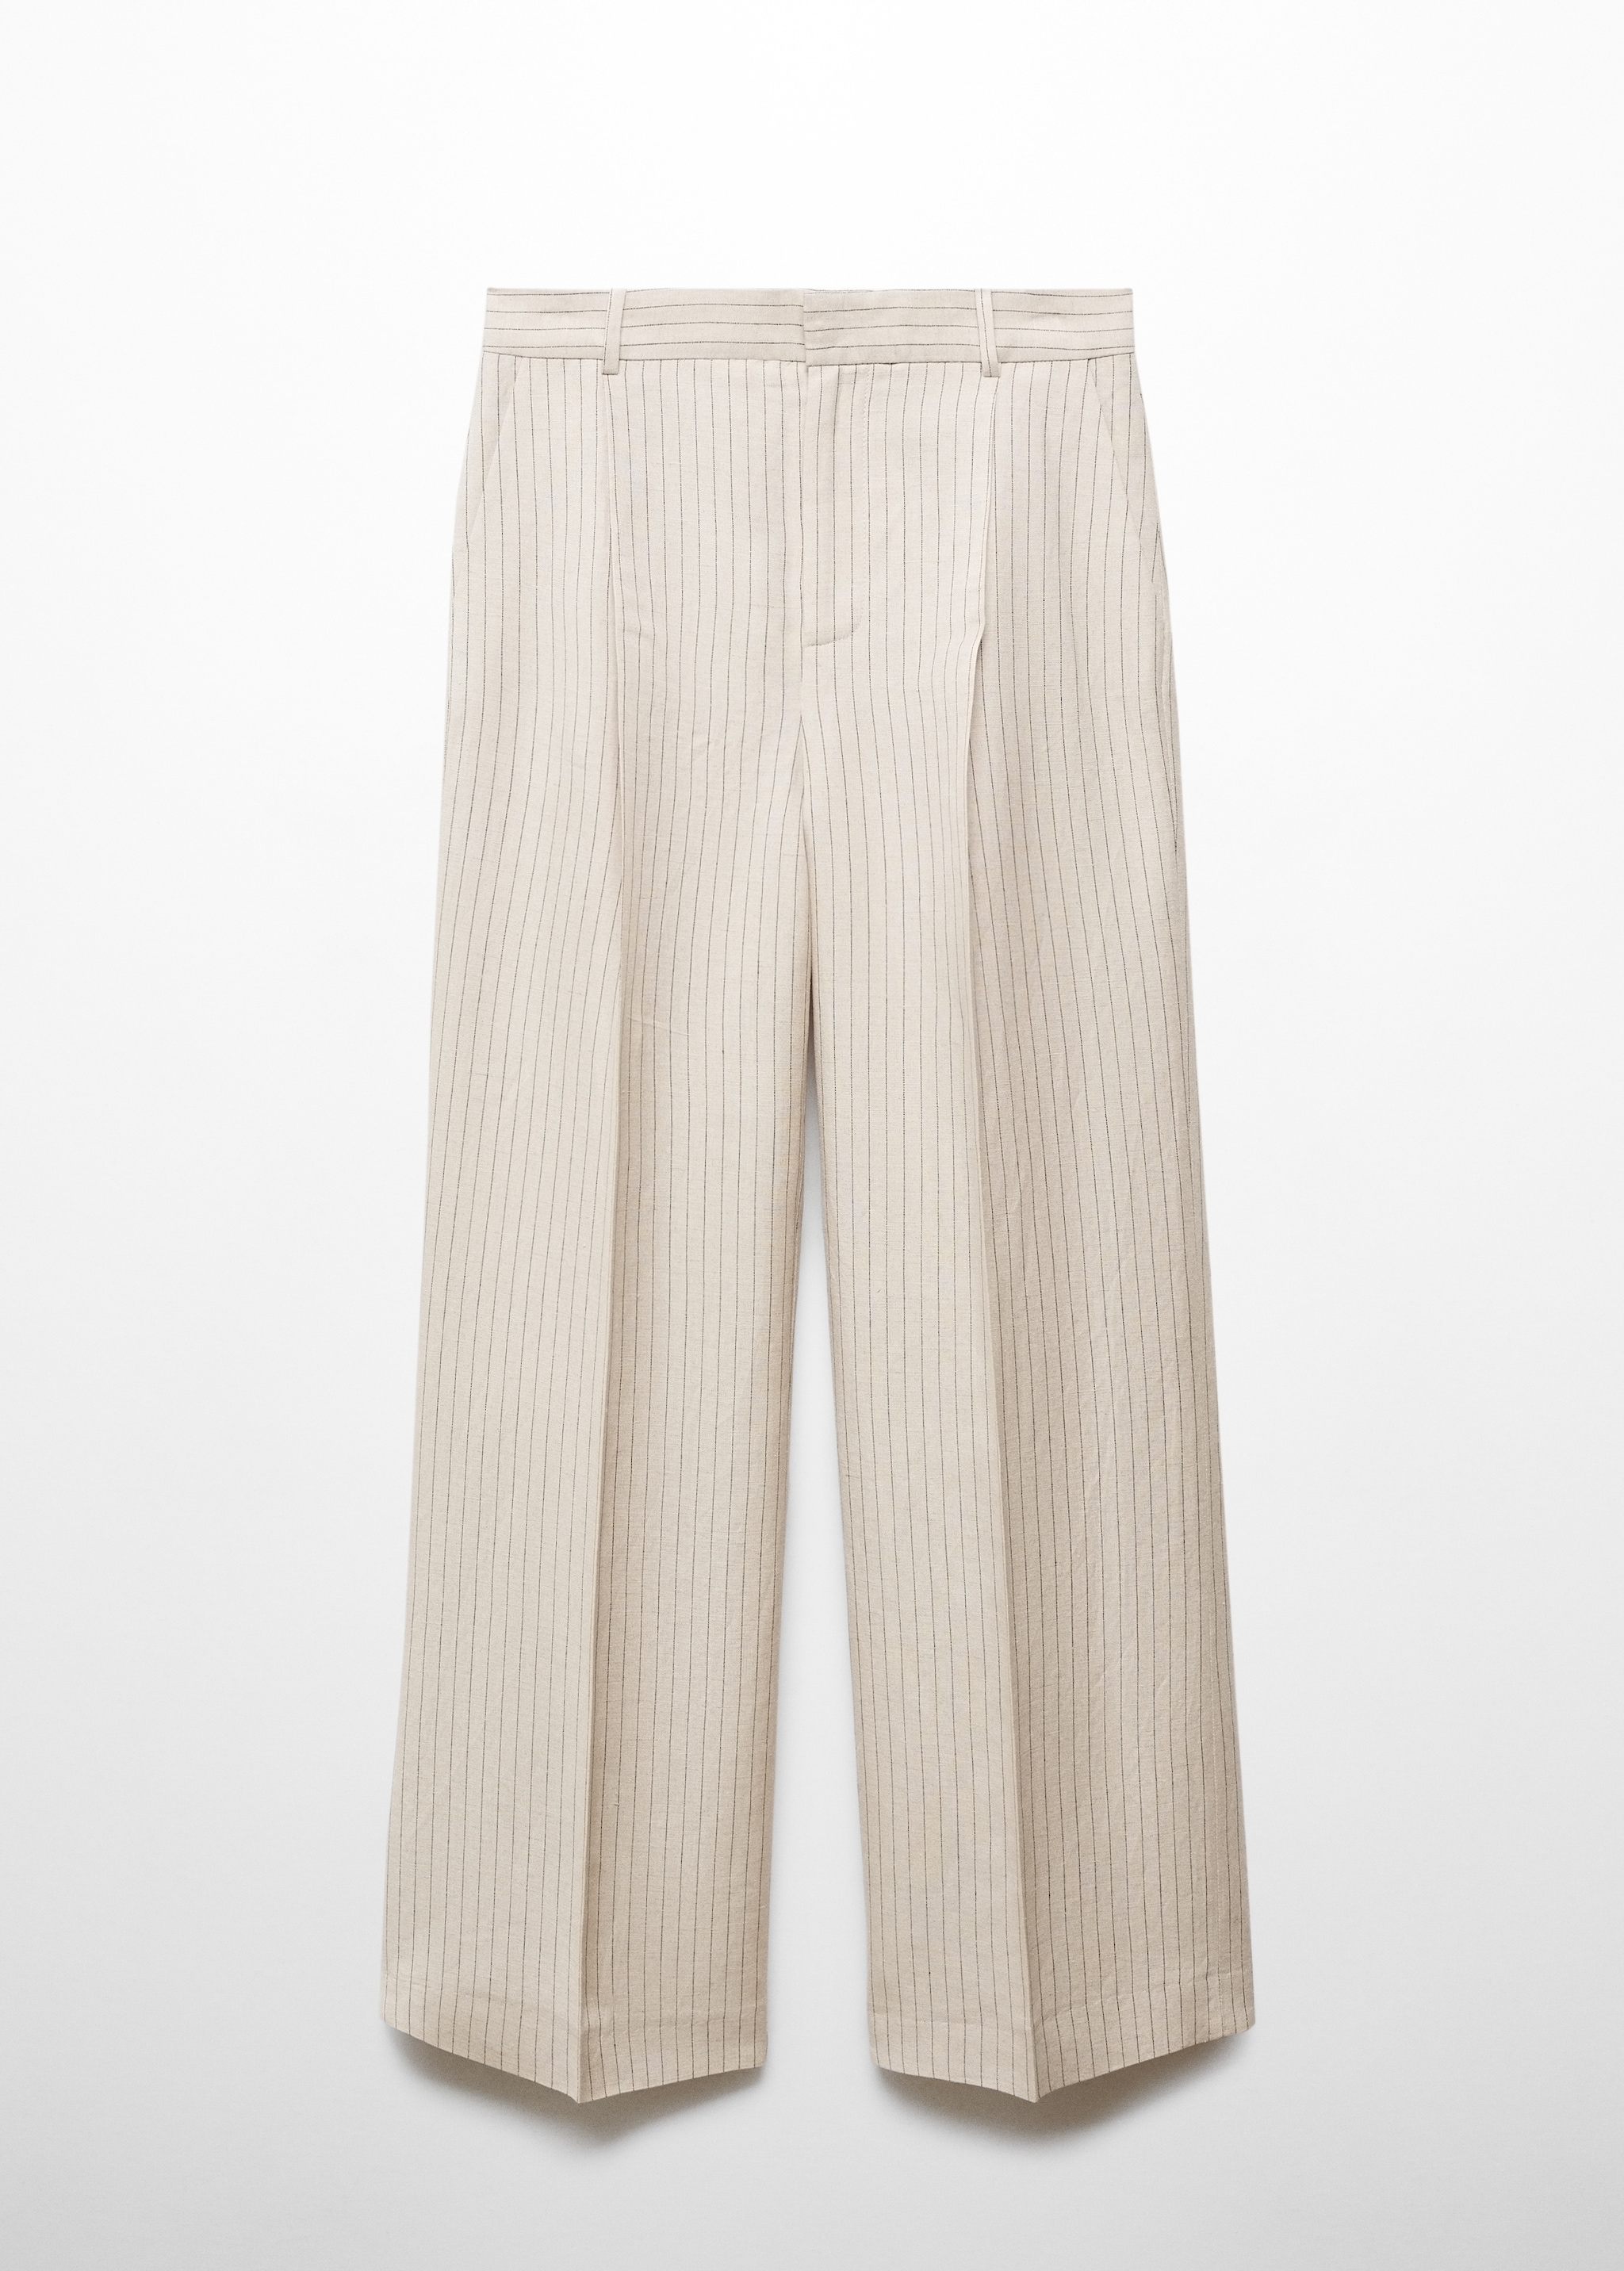 Striped suit trousers - Article without model